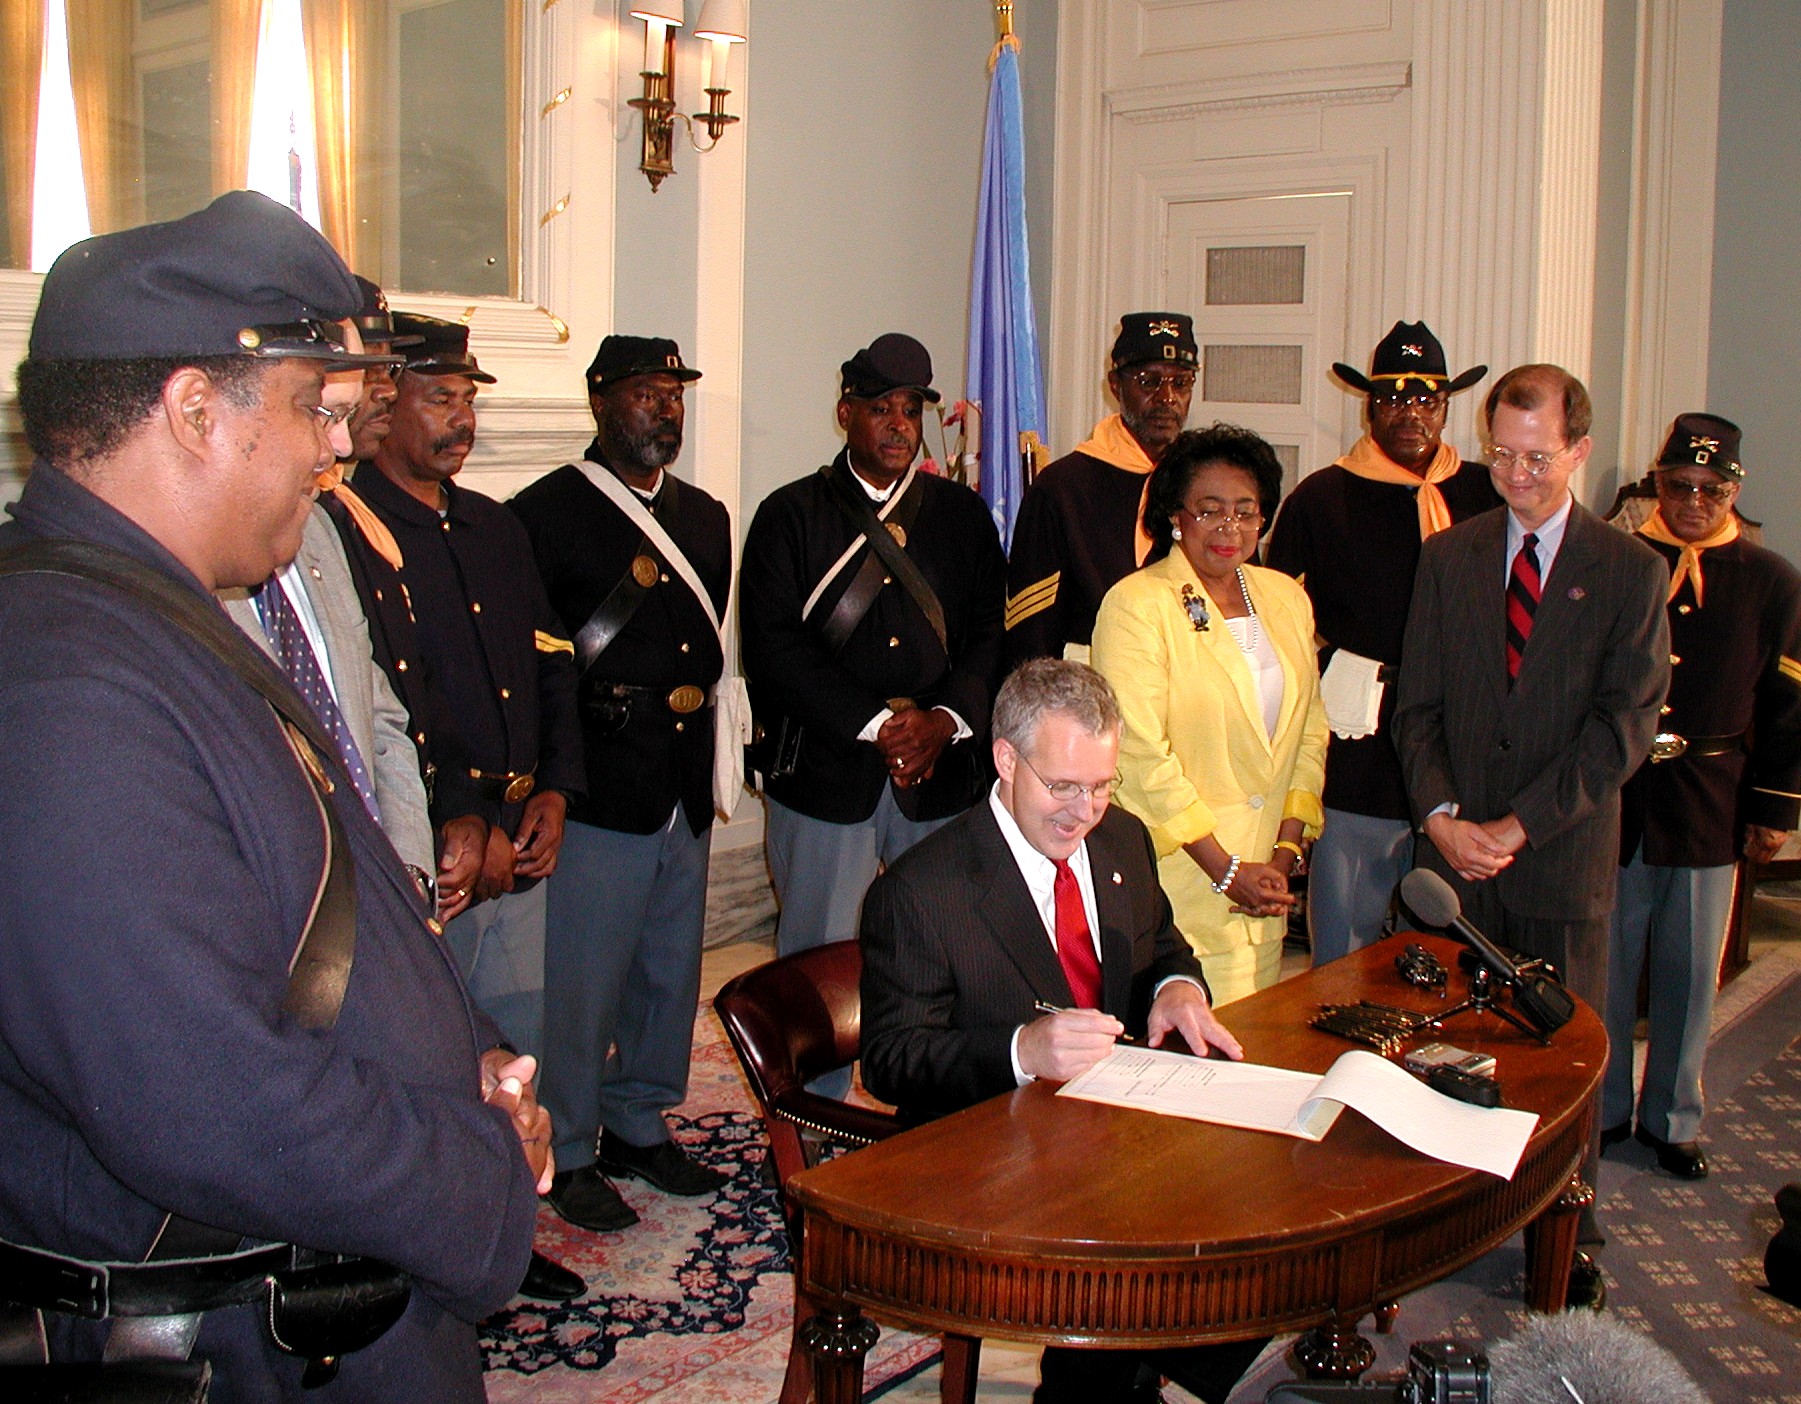 Sen. Eason McIntyre and the Buffalo Soldiers watch Gov. Henry sign the bill.